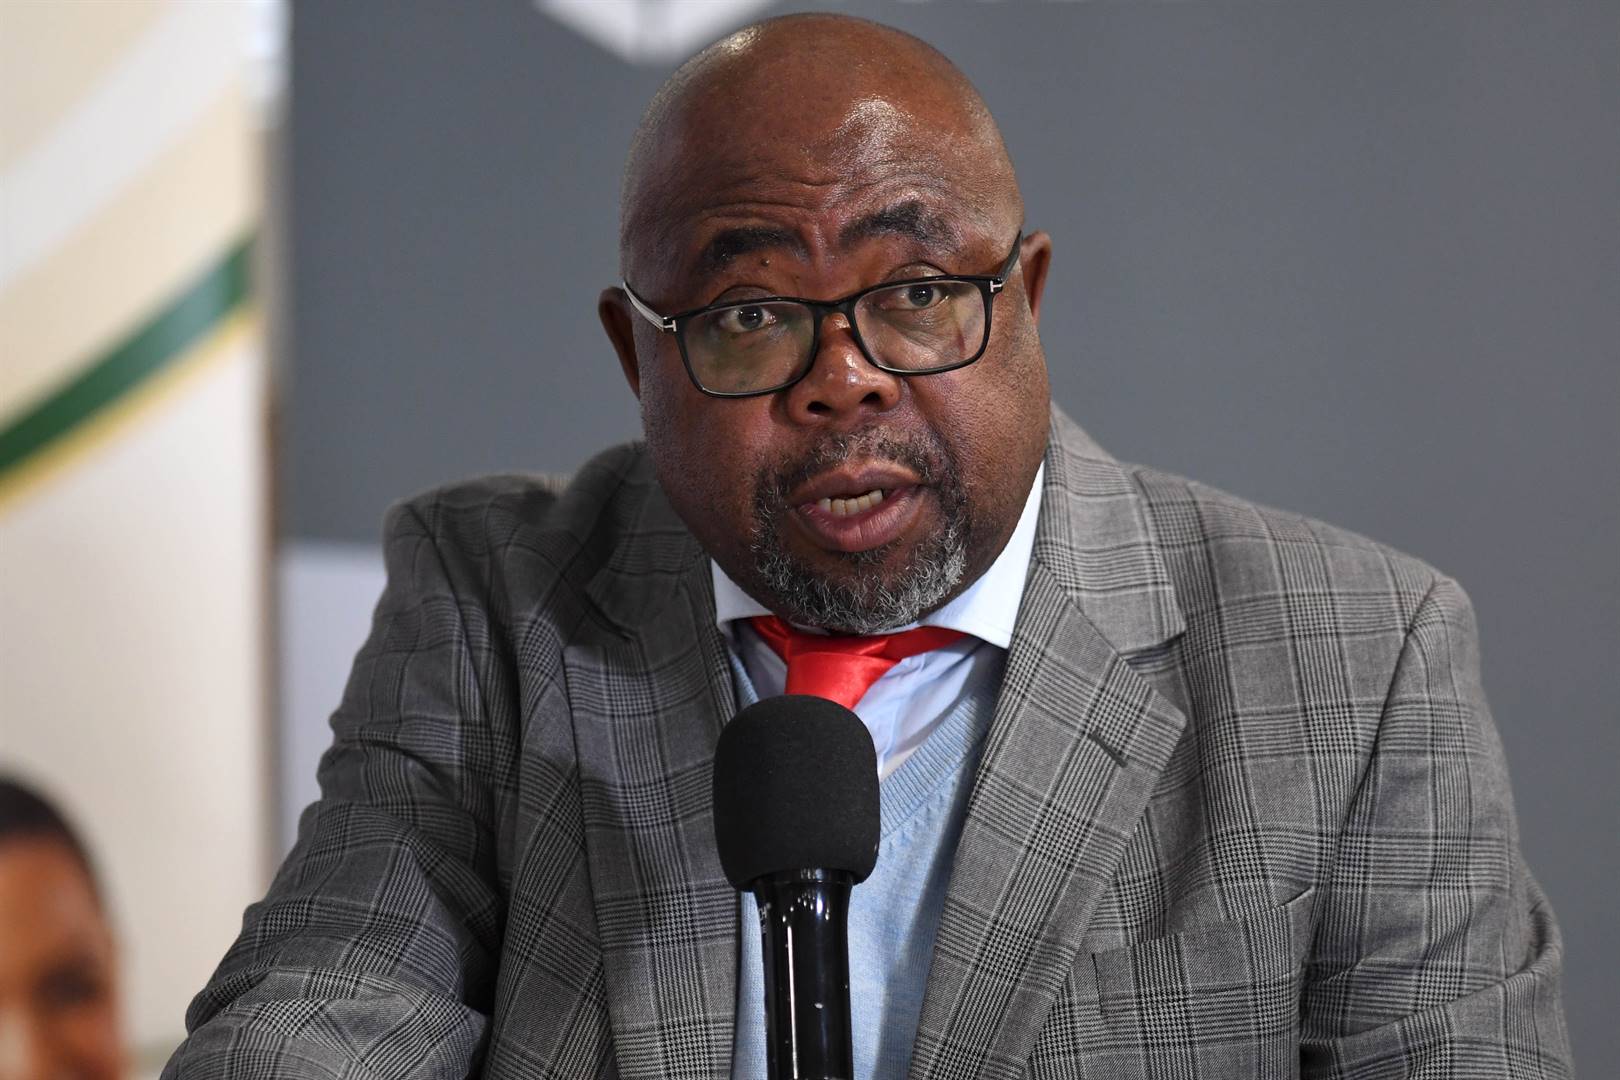 Labour and Employment Minister Thulas Nxesi was confident more jobs would be created.